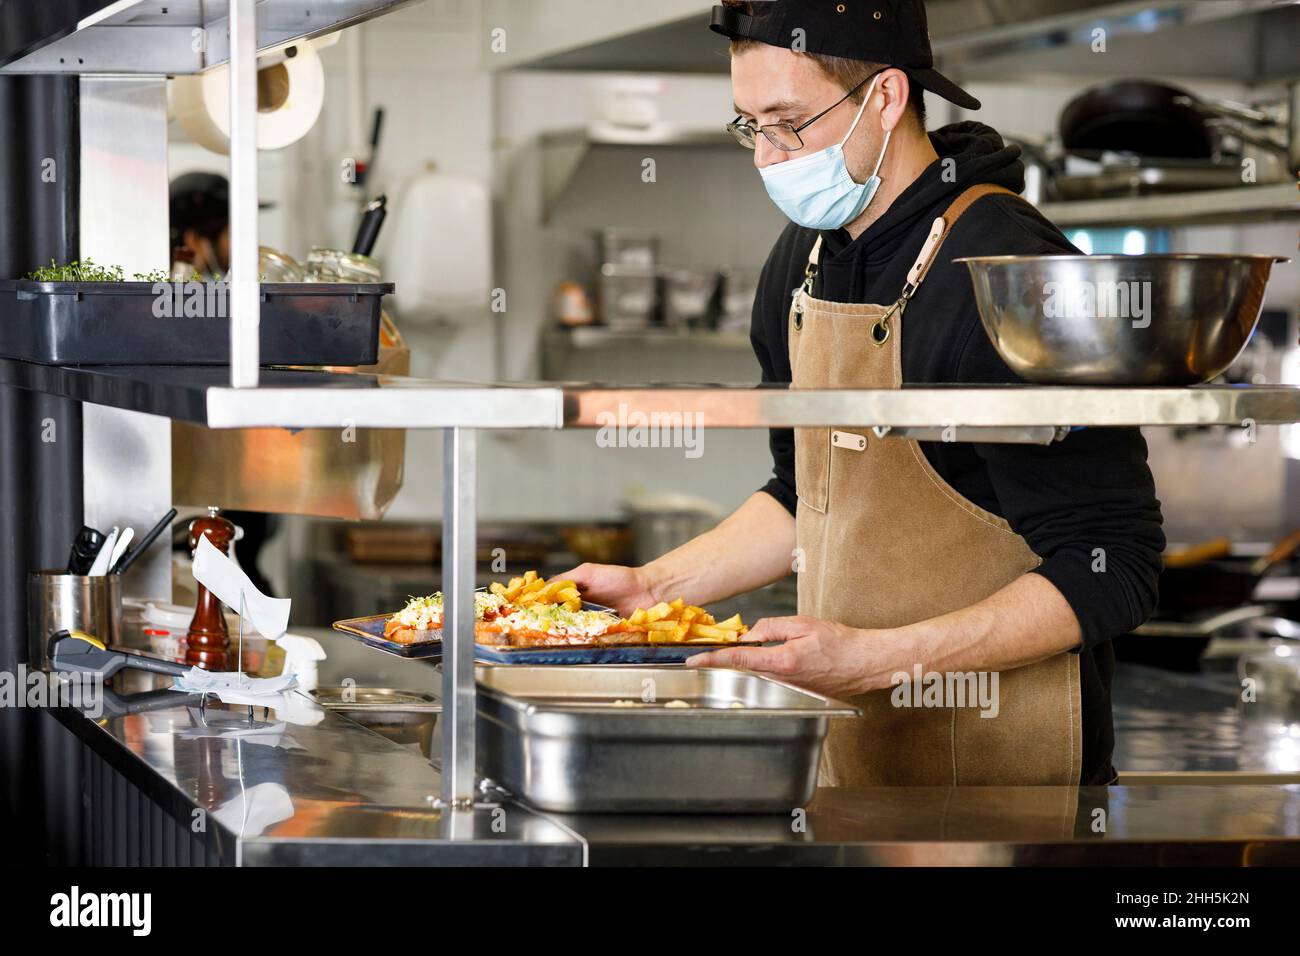 Chef with protective face mask holding food plates at restaurant kitchen Stock Photo